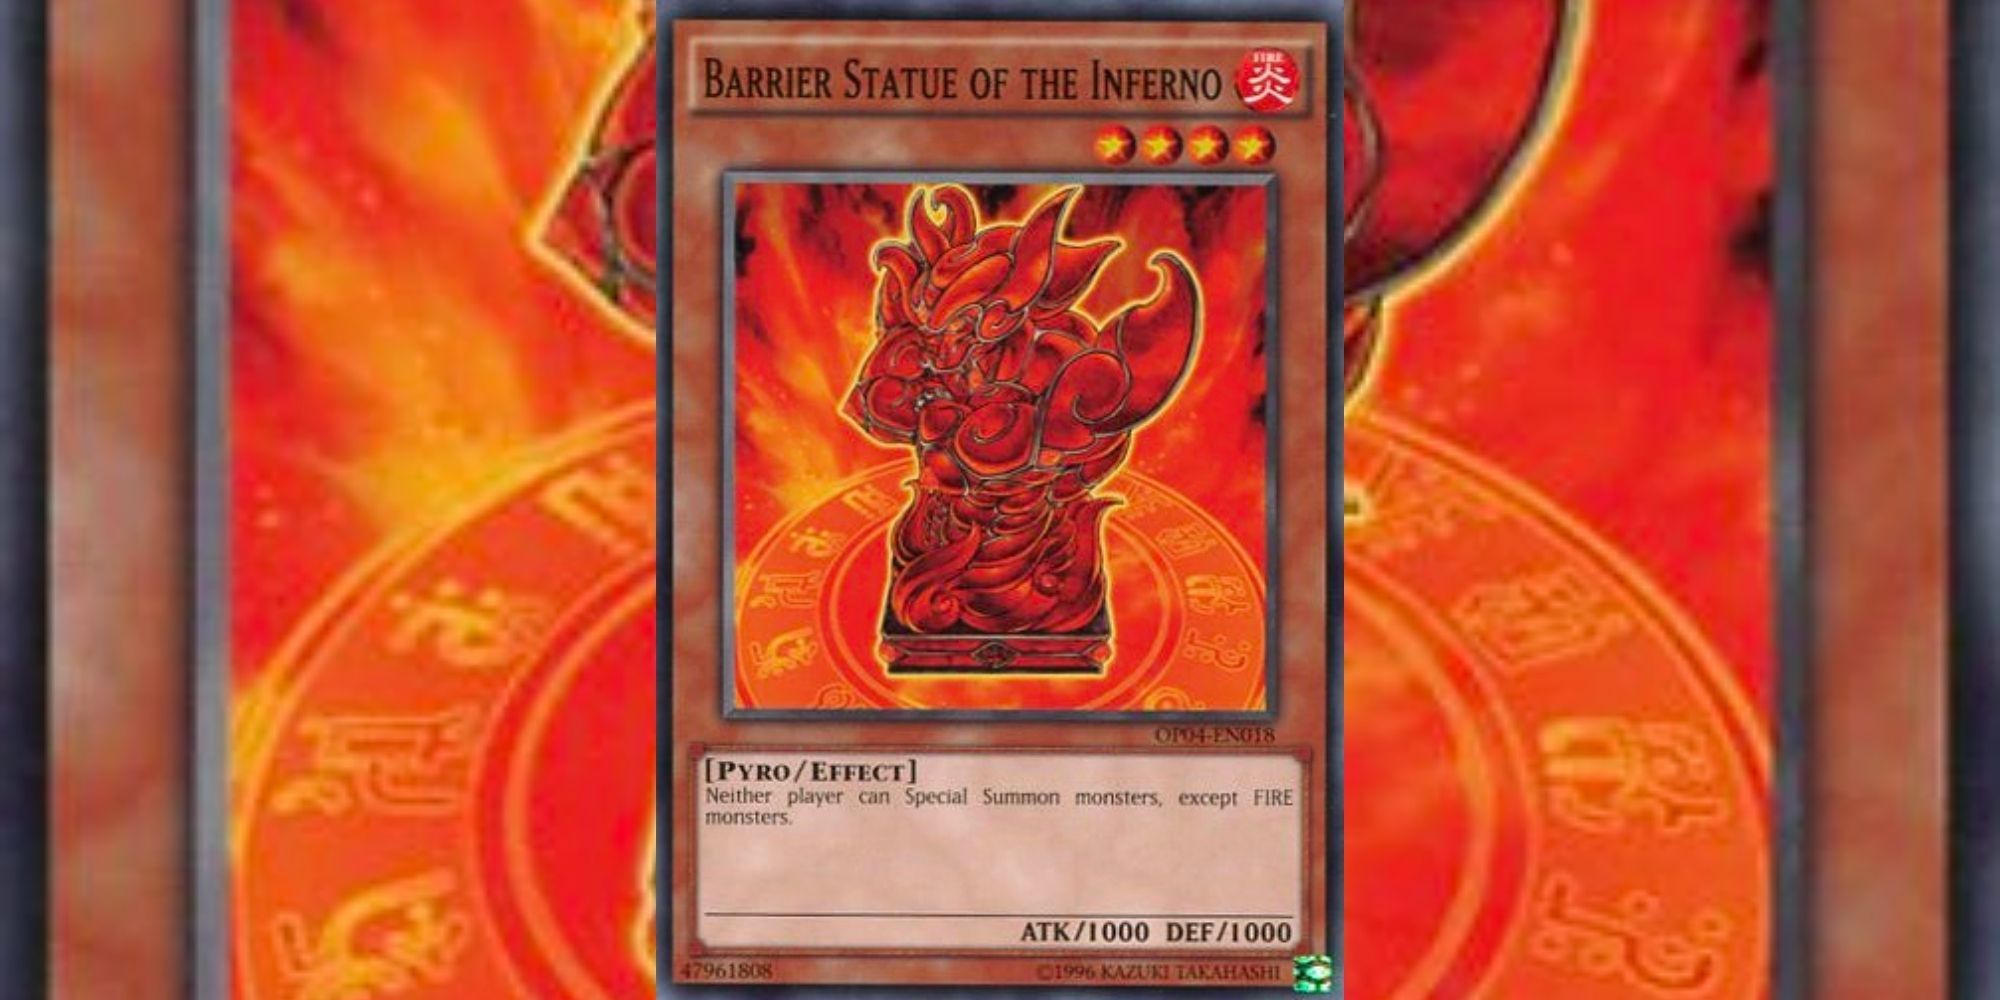 Barrier Statue of the Inferno card in Yu-Gi-Oh!